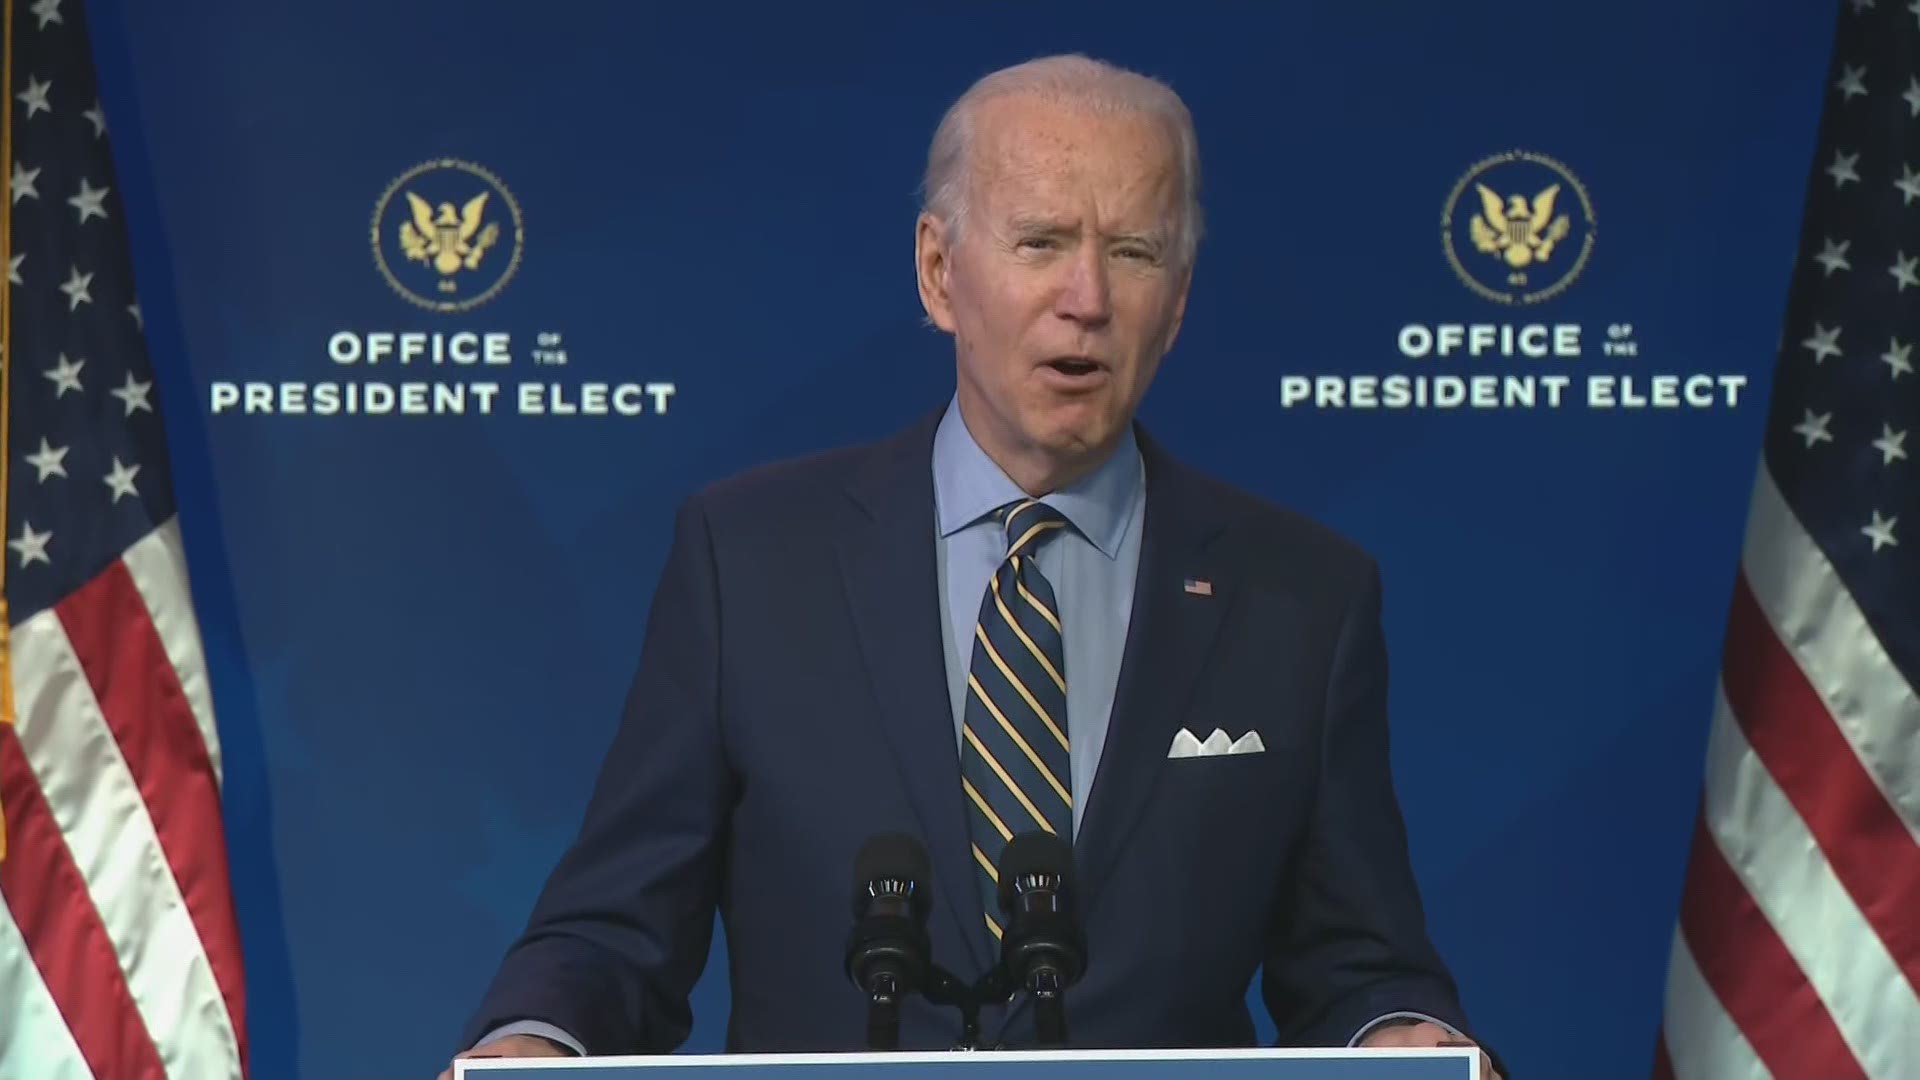 President-elect Joe Biden provides remarks following meeting with his national security and foreign policy teams.